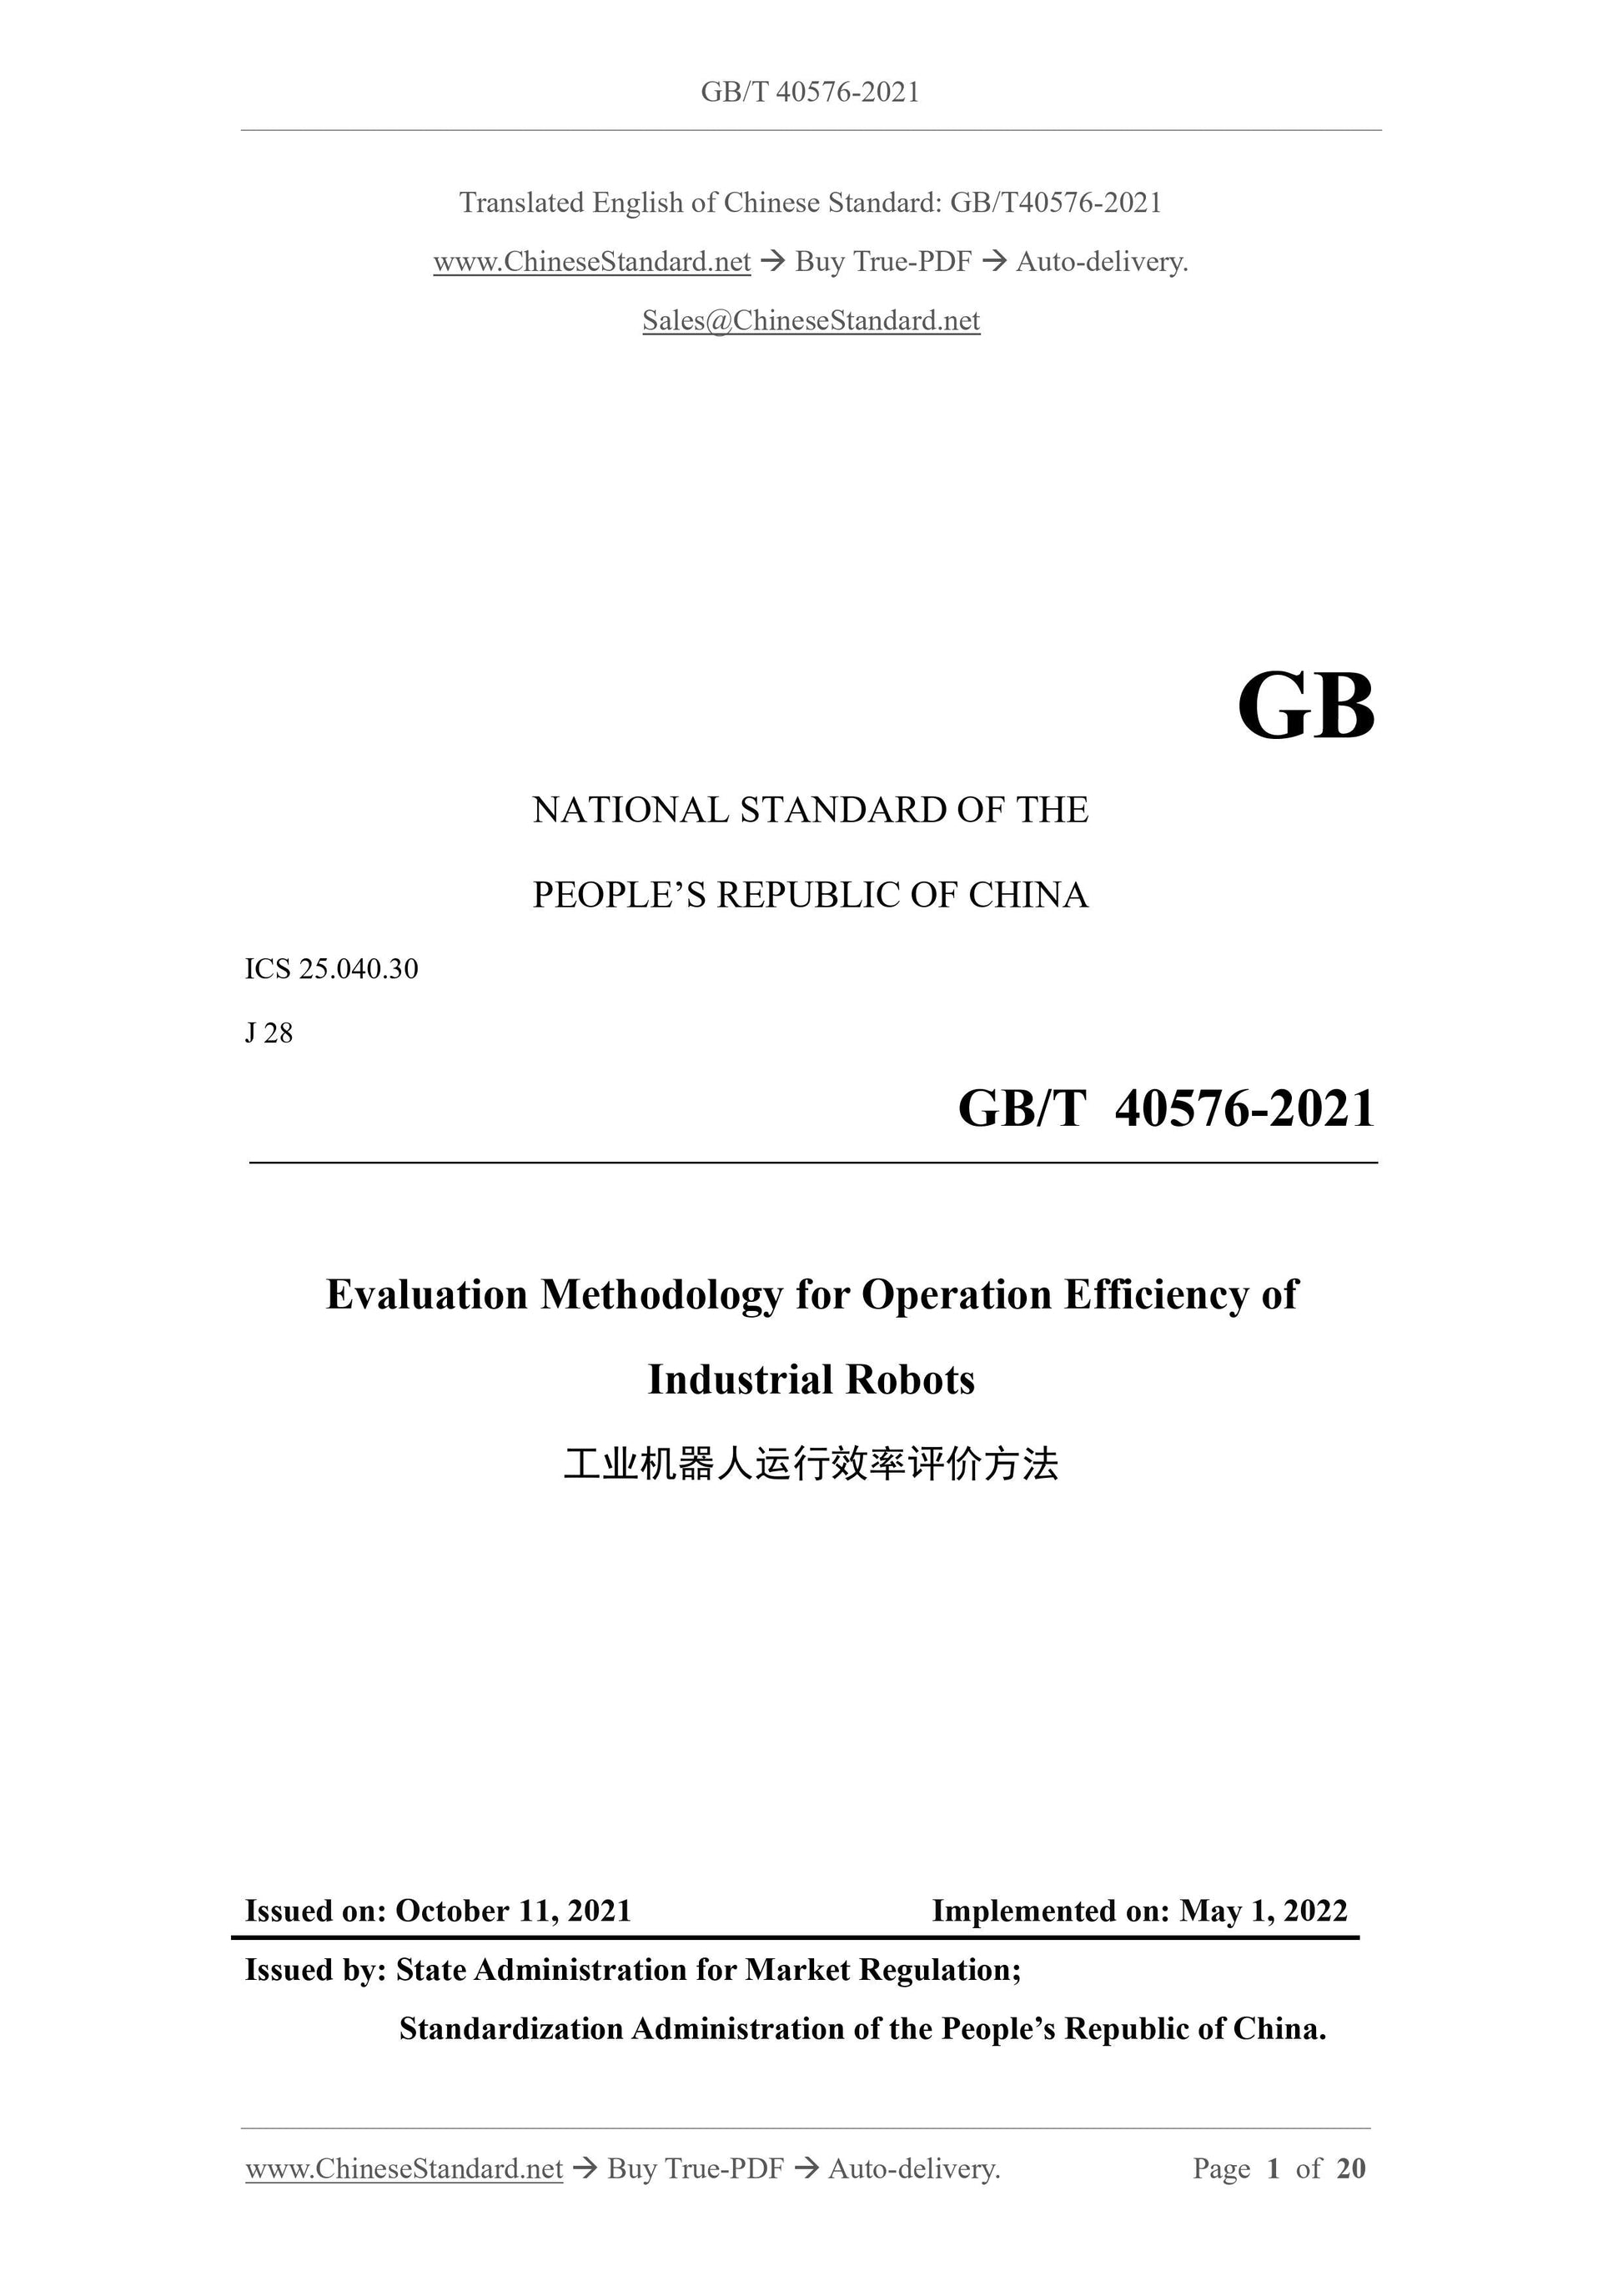 GB/T 40576-2021 Page 1